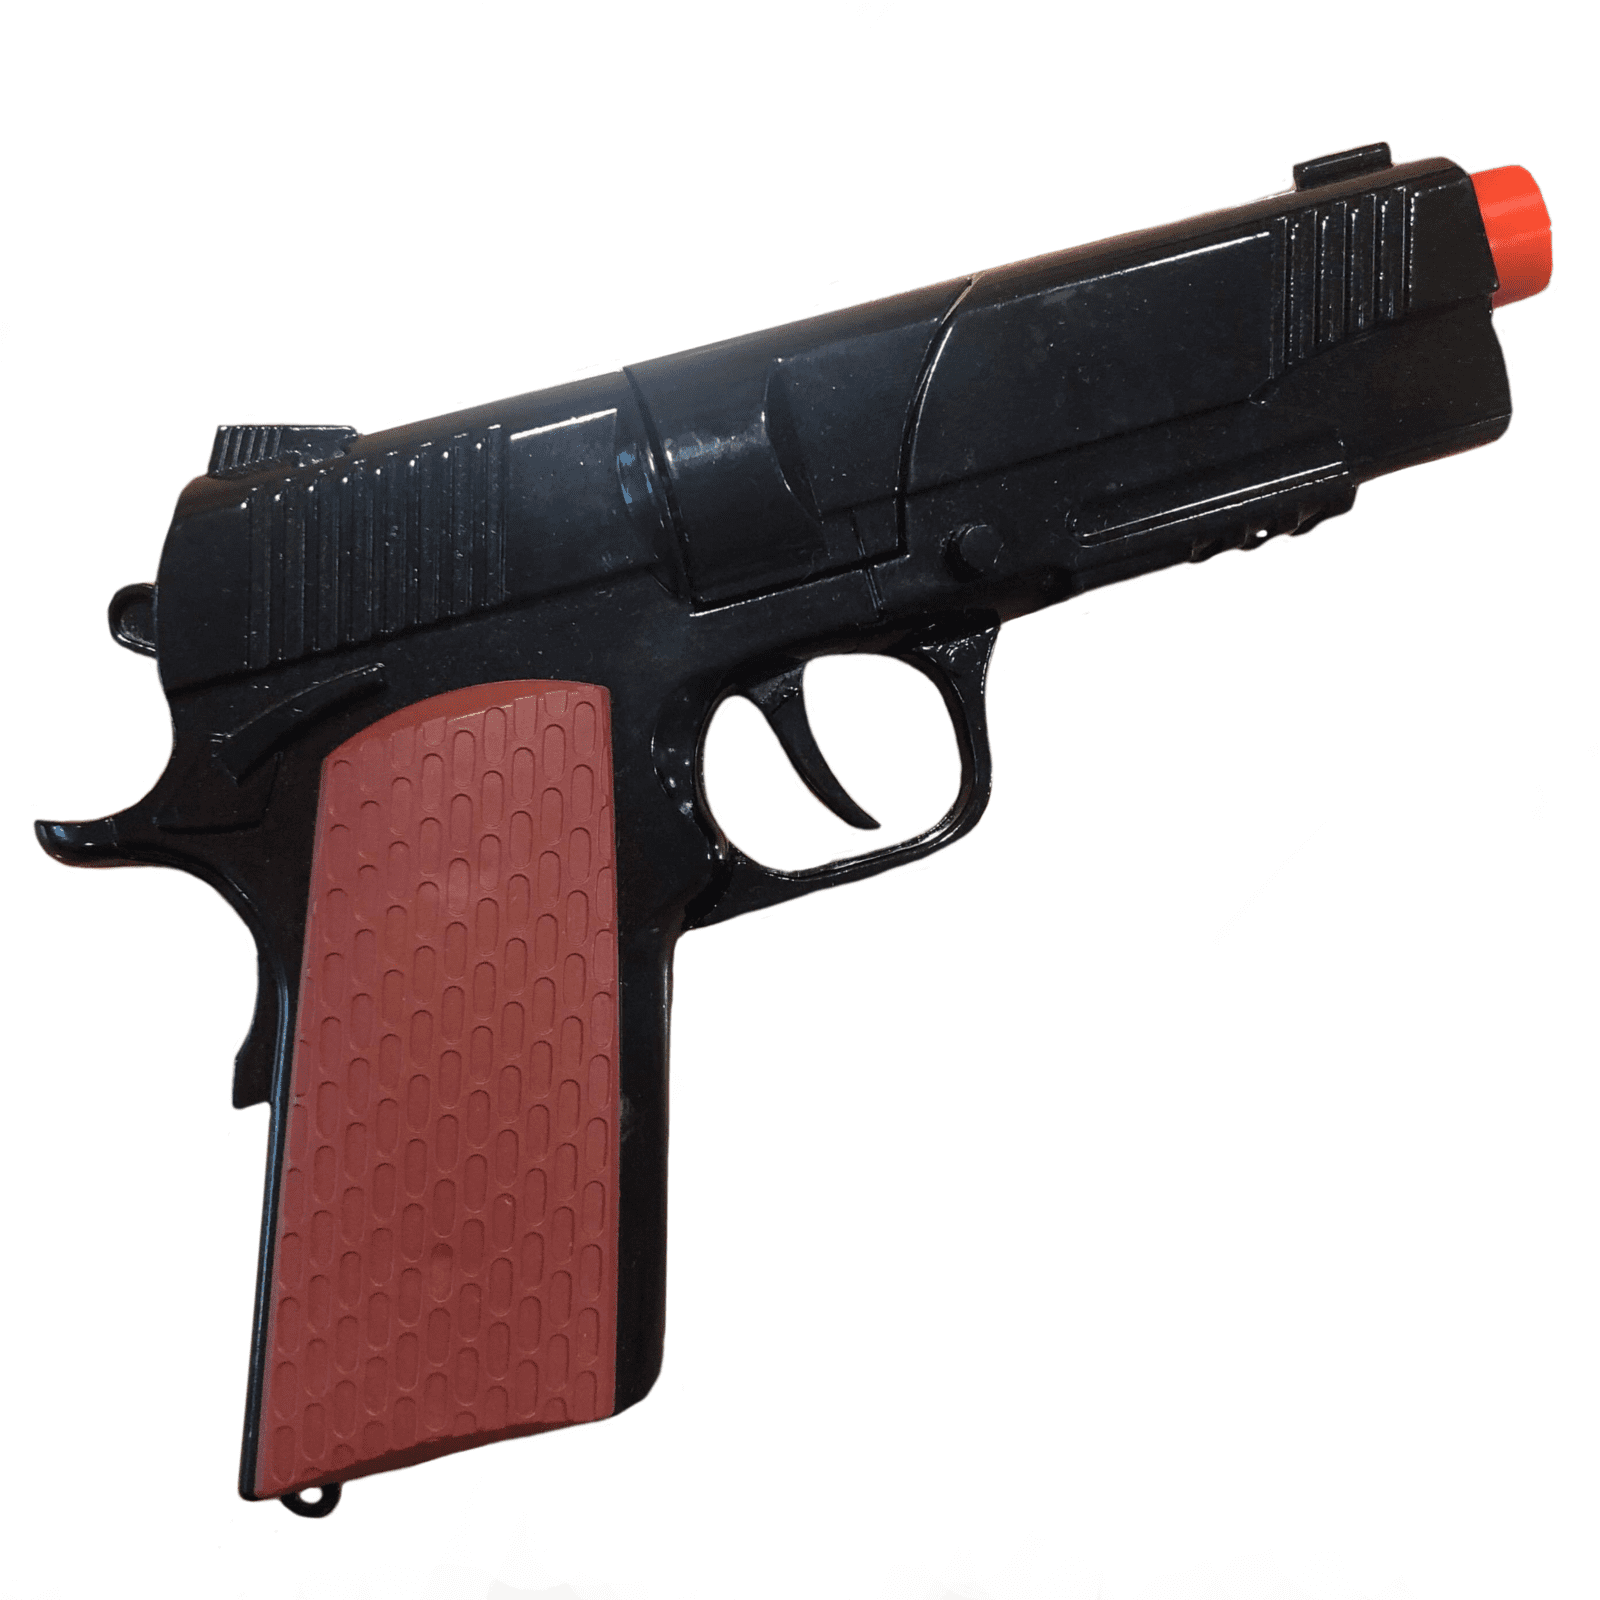 Featured image for “Diecast Metal Automatic Pistol Realistic Black”